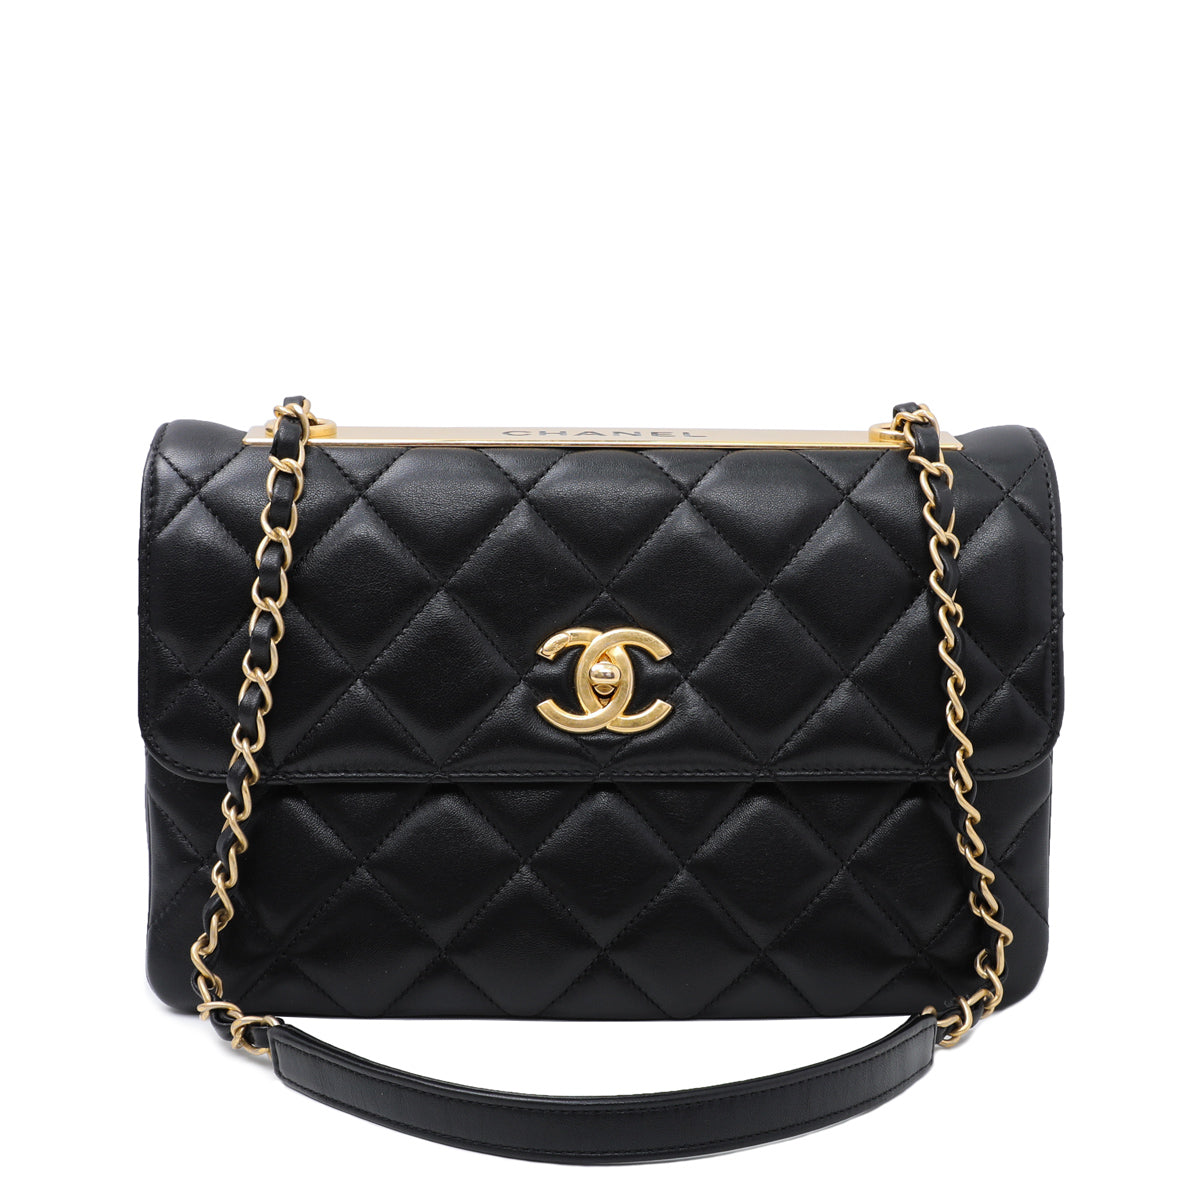 Trendy cc top handle leather handbag Chanel Black in Leather  20982233